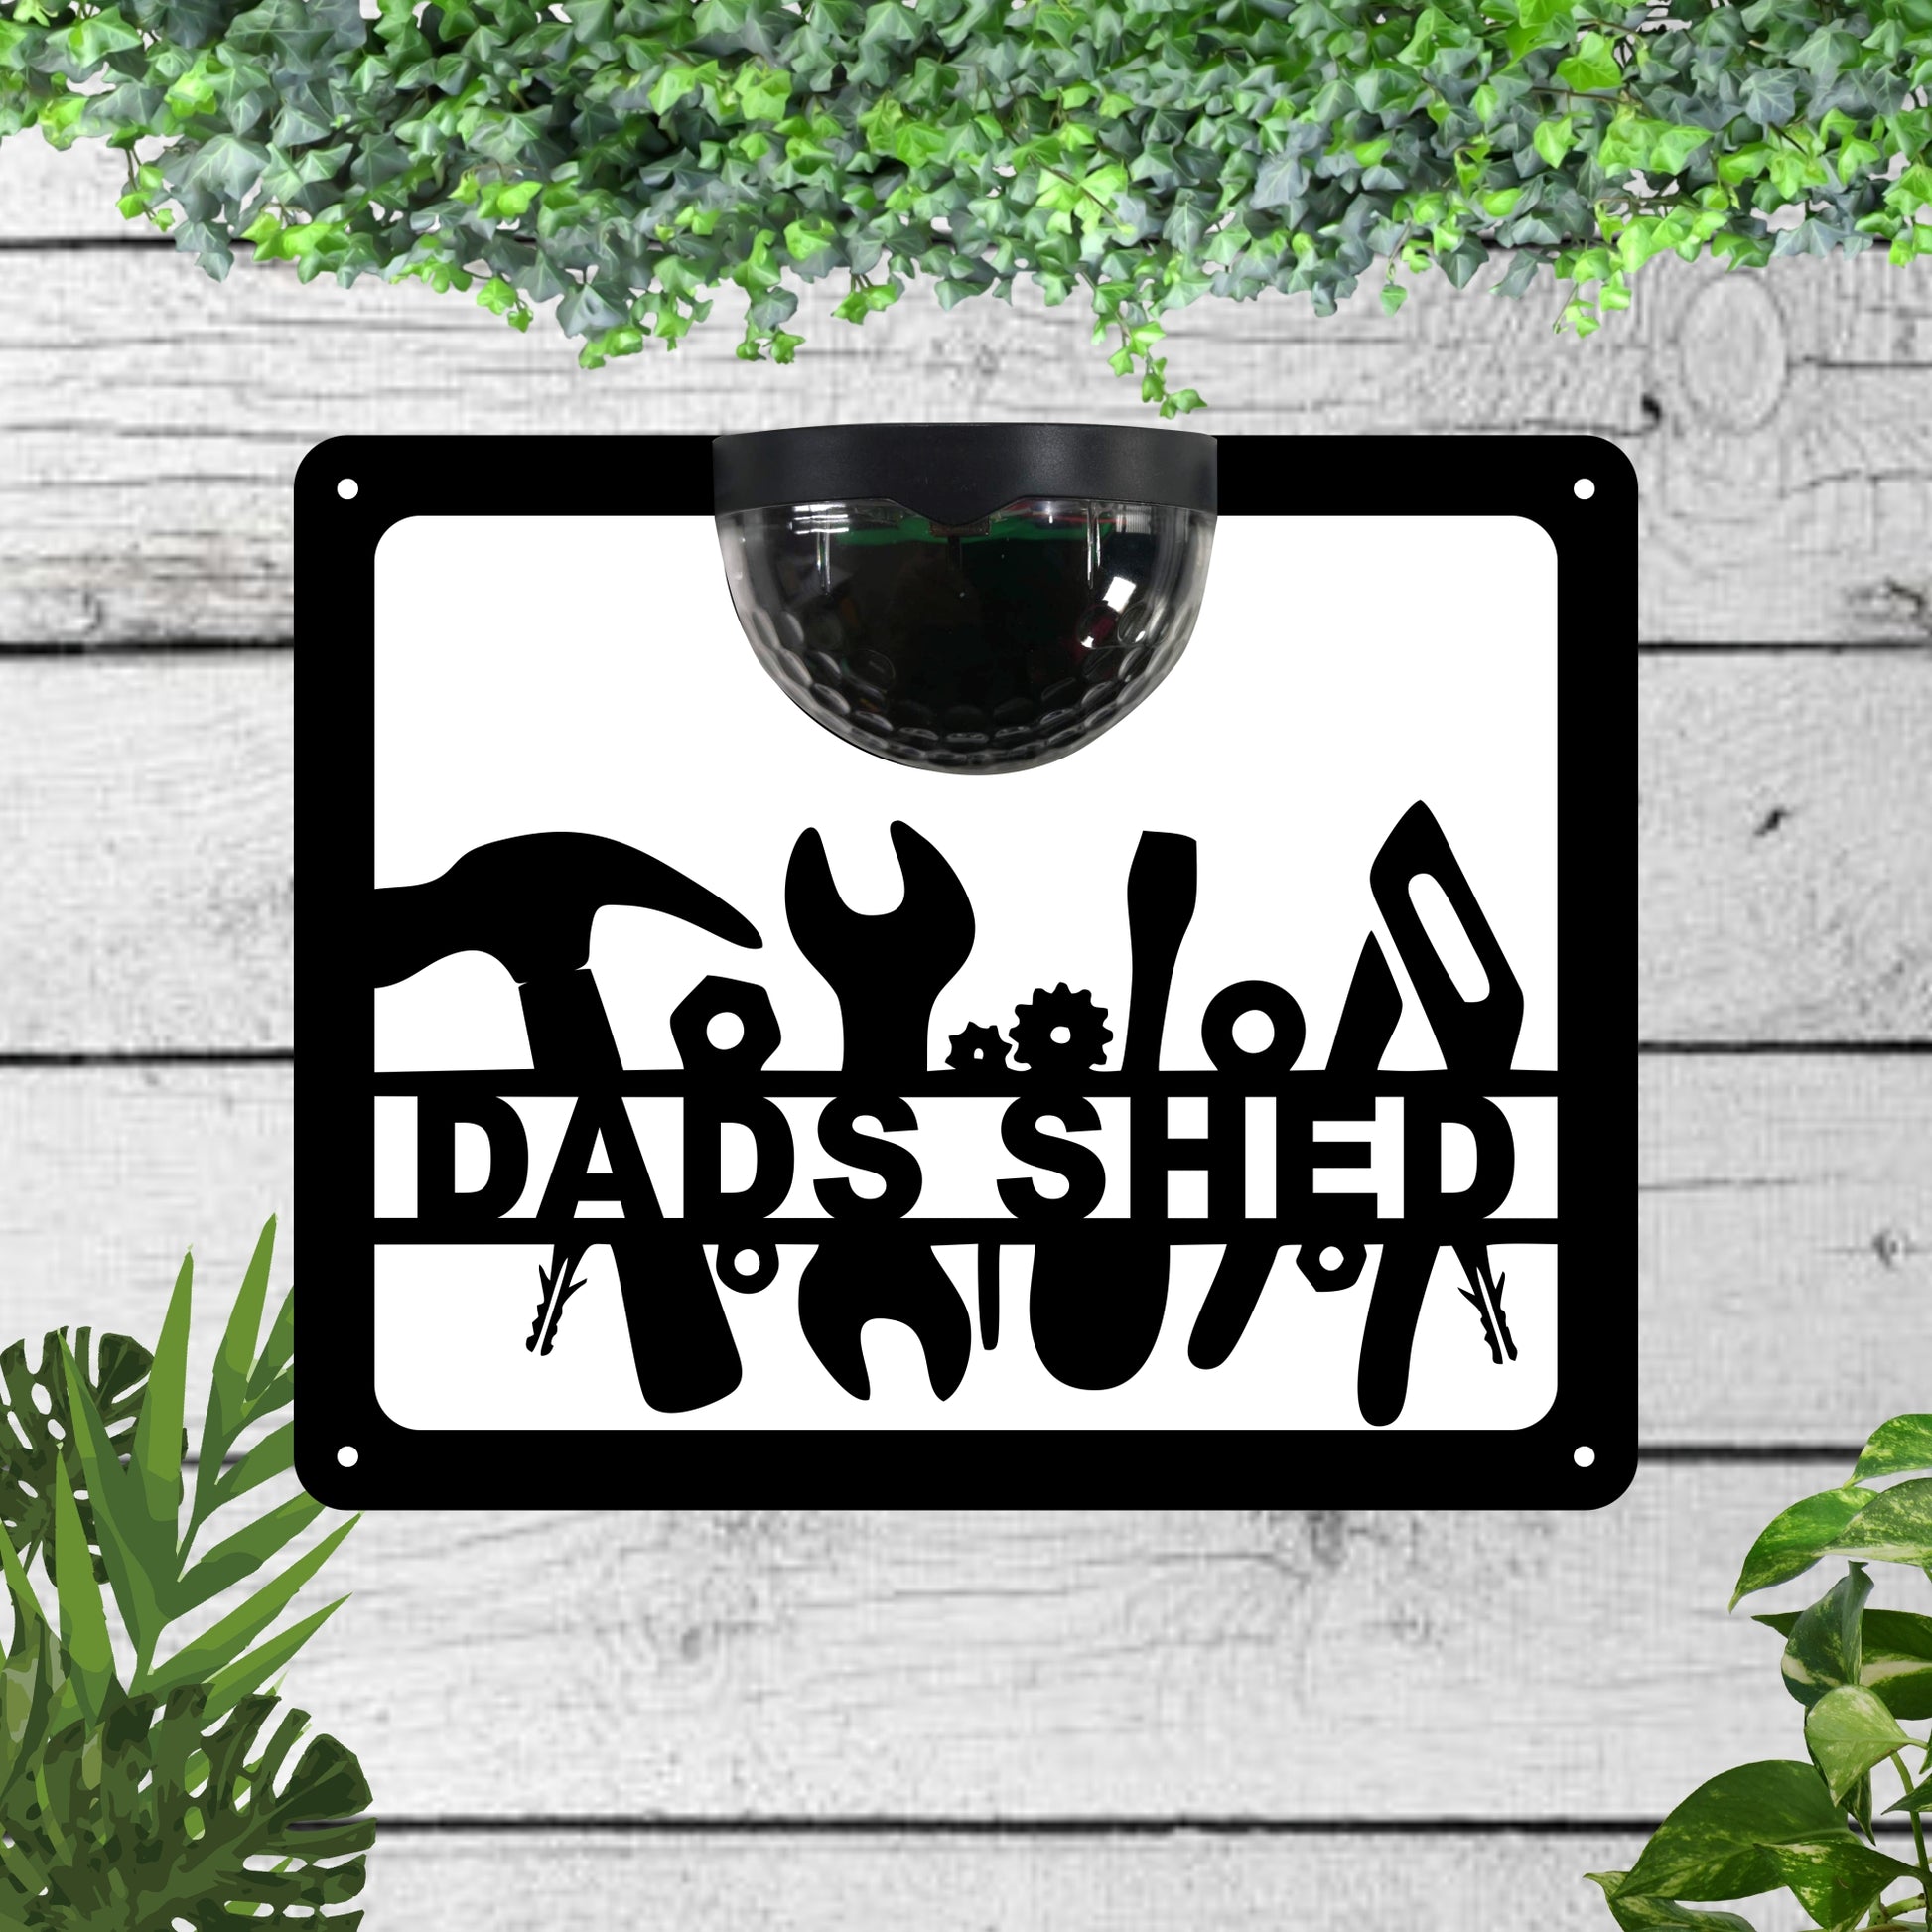 Garden Solar Light Wall Plaque for Dads Shed | John Alans